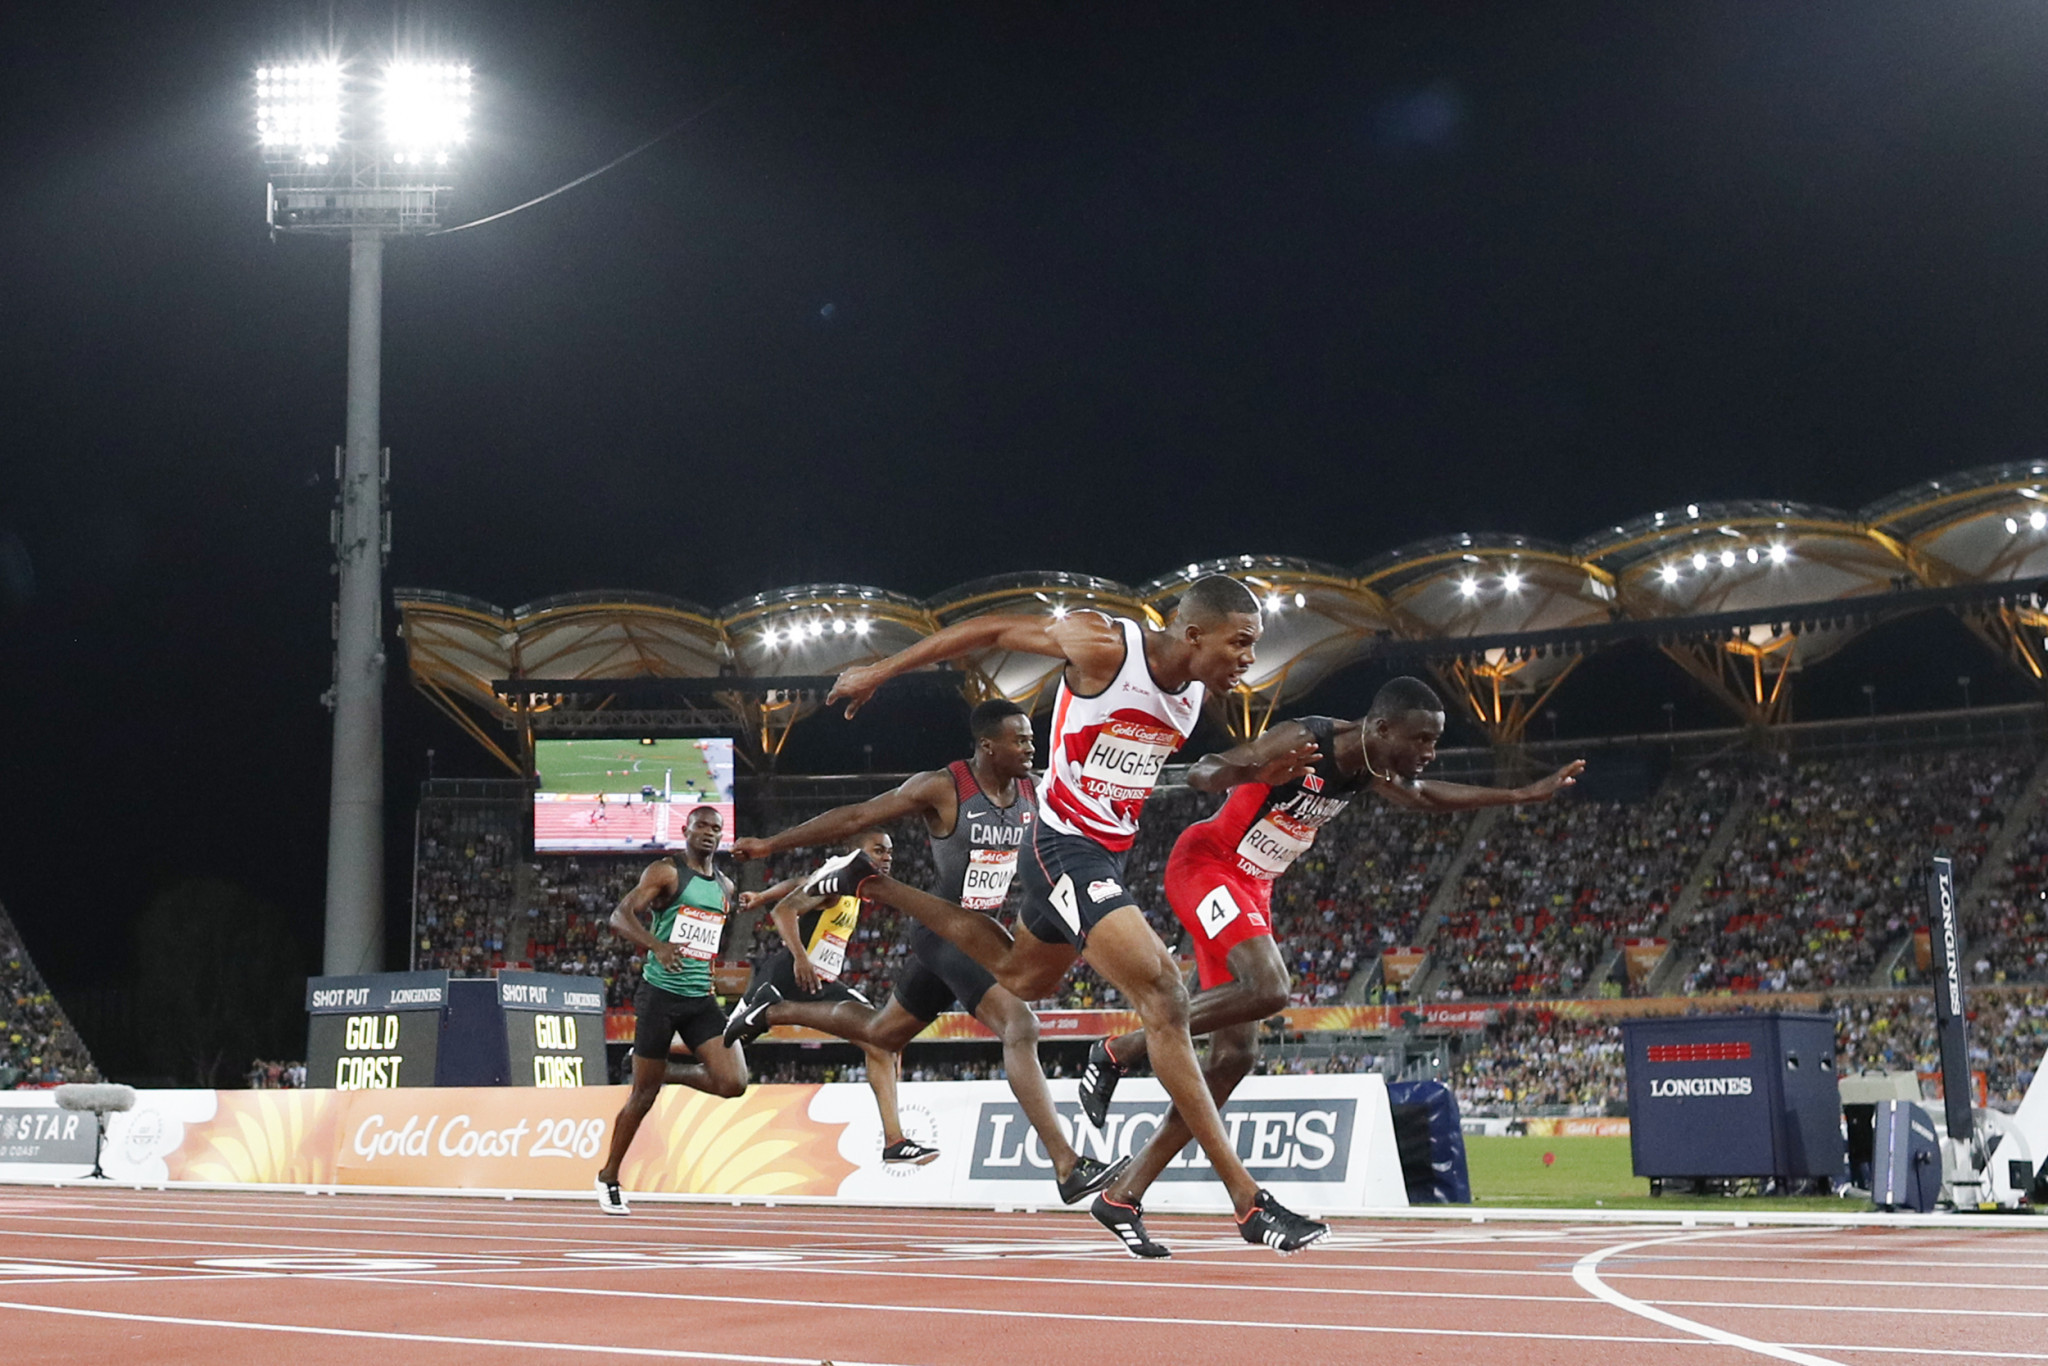 Richards wins men's 200m title at Gold Coast 2018 after Hughes’ disqualification as Miller-Uibo claims women's crown